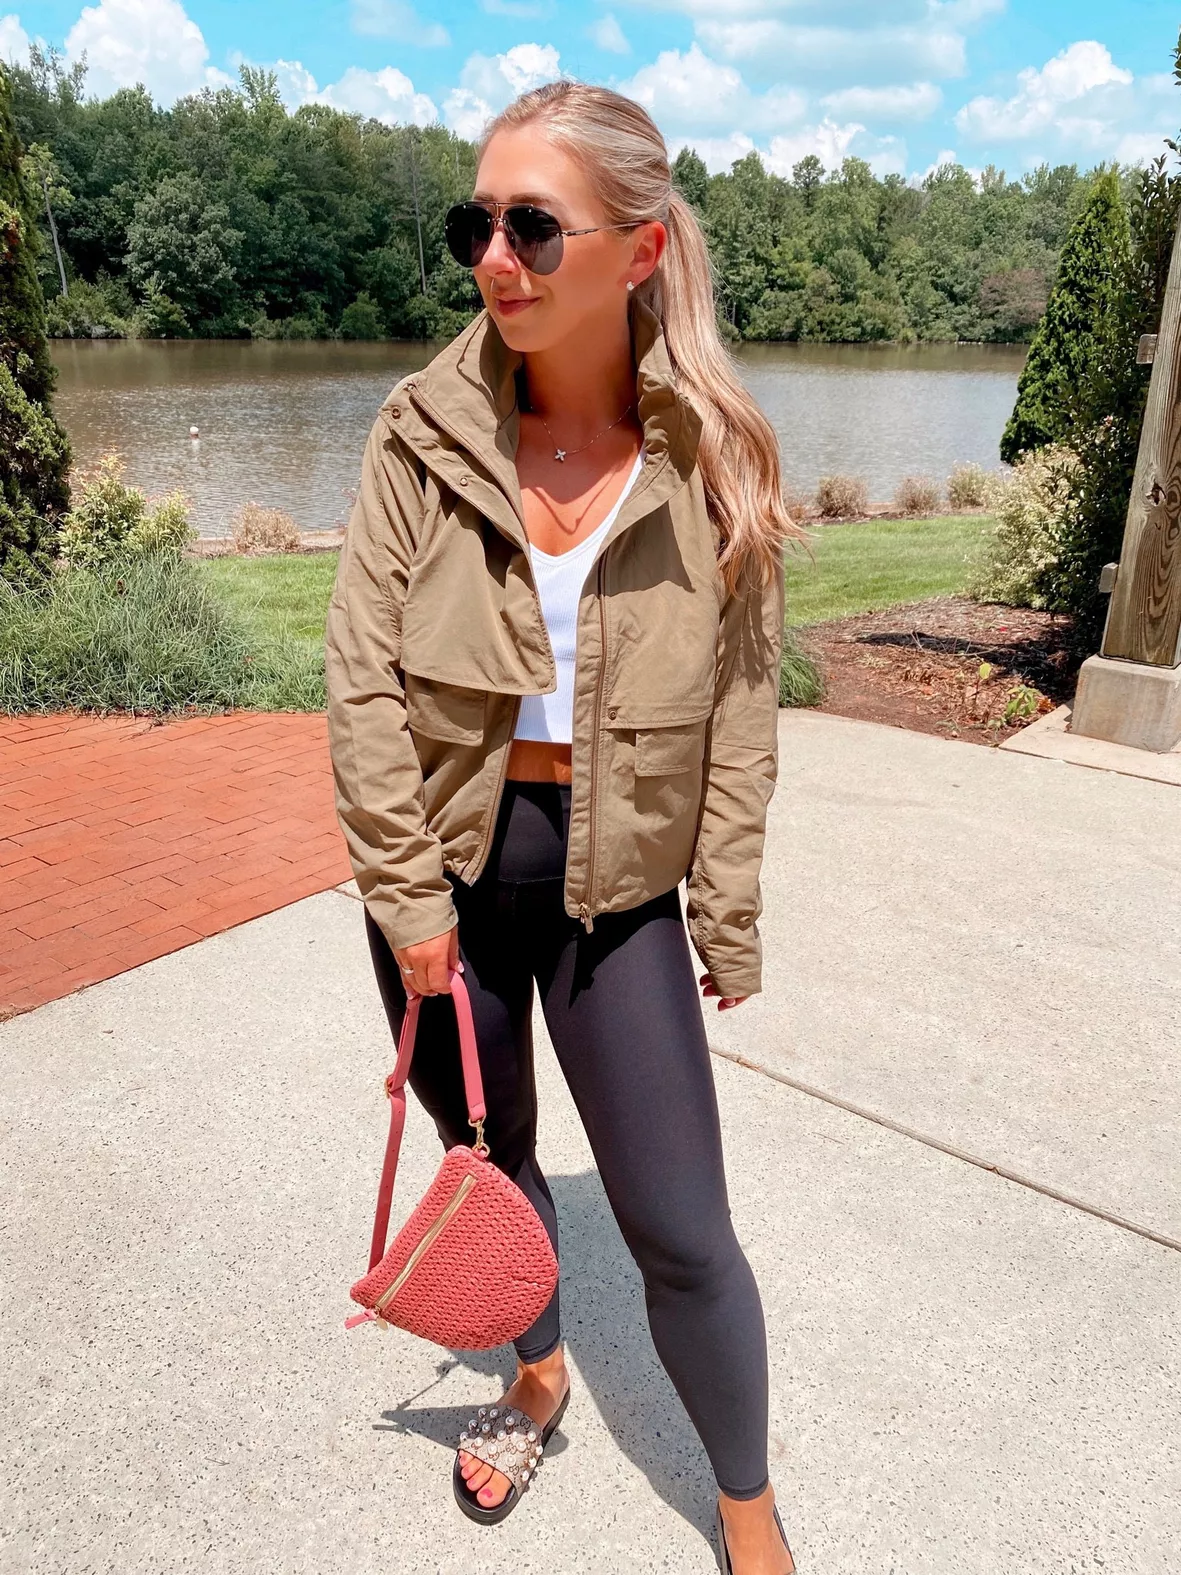 This $198 Lululemon jacket is 'effortlessly chic' for fall